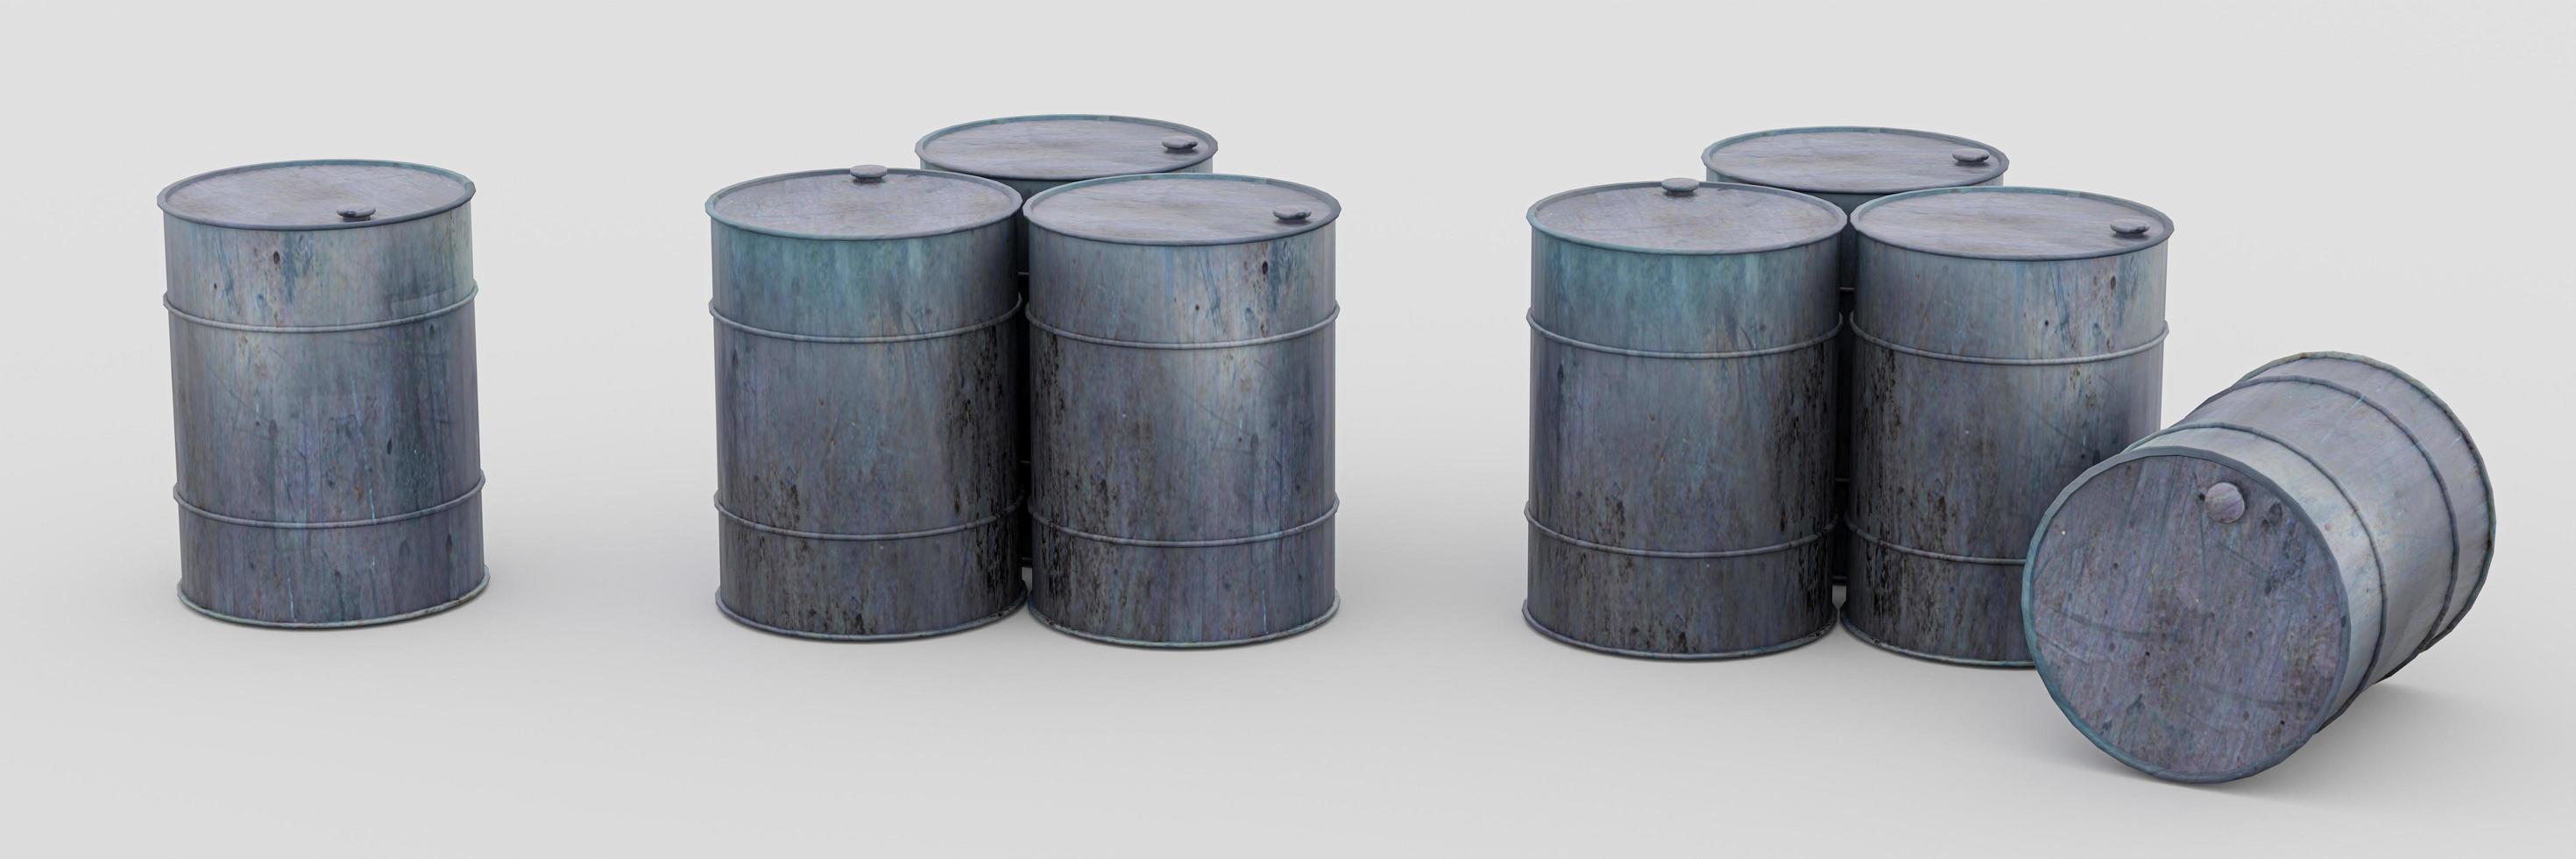 Oil barrel with rusty, leaking oil drum. Isolated on white background. 3D Rendering photo